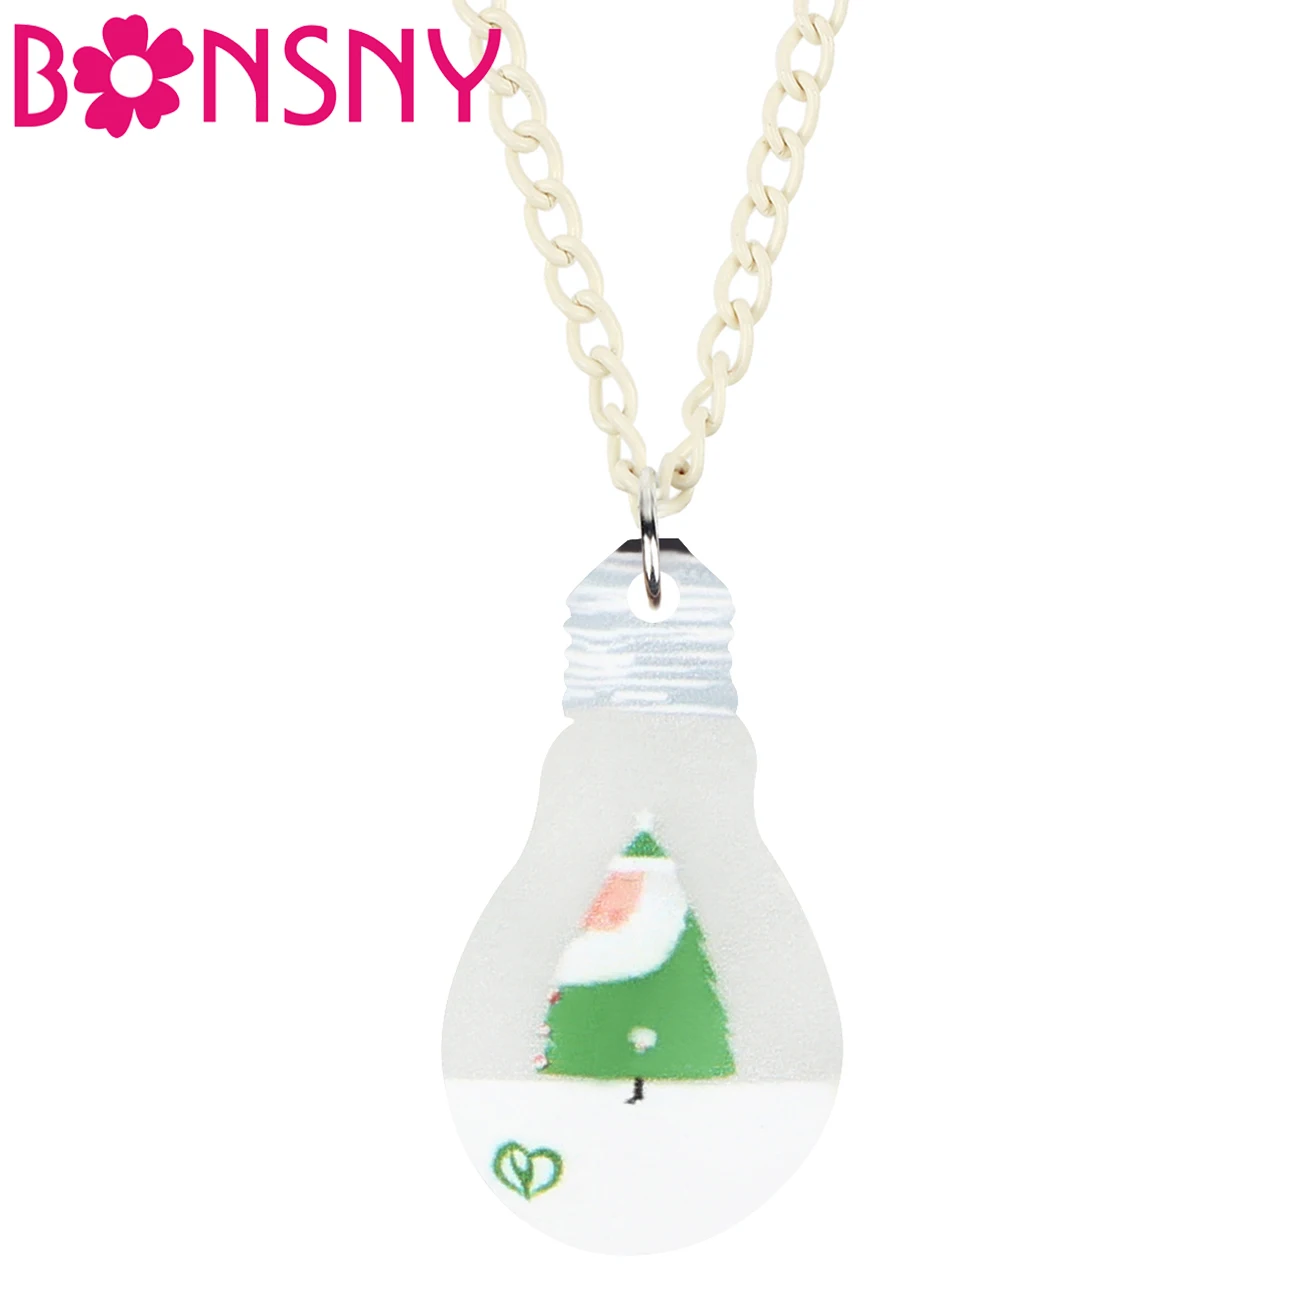 

Bonsny Acrylic Christmas Tree Bulb Santa Claus Necklace Chain Pendant Jewelry For Women Kid Teens Friends Party Gifts Decoration